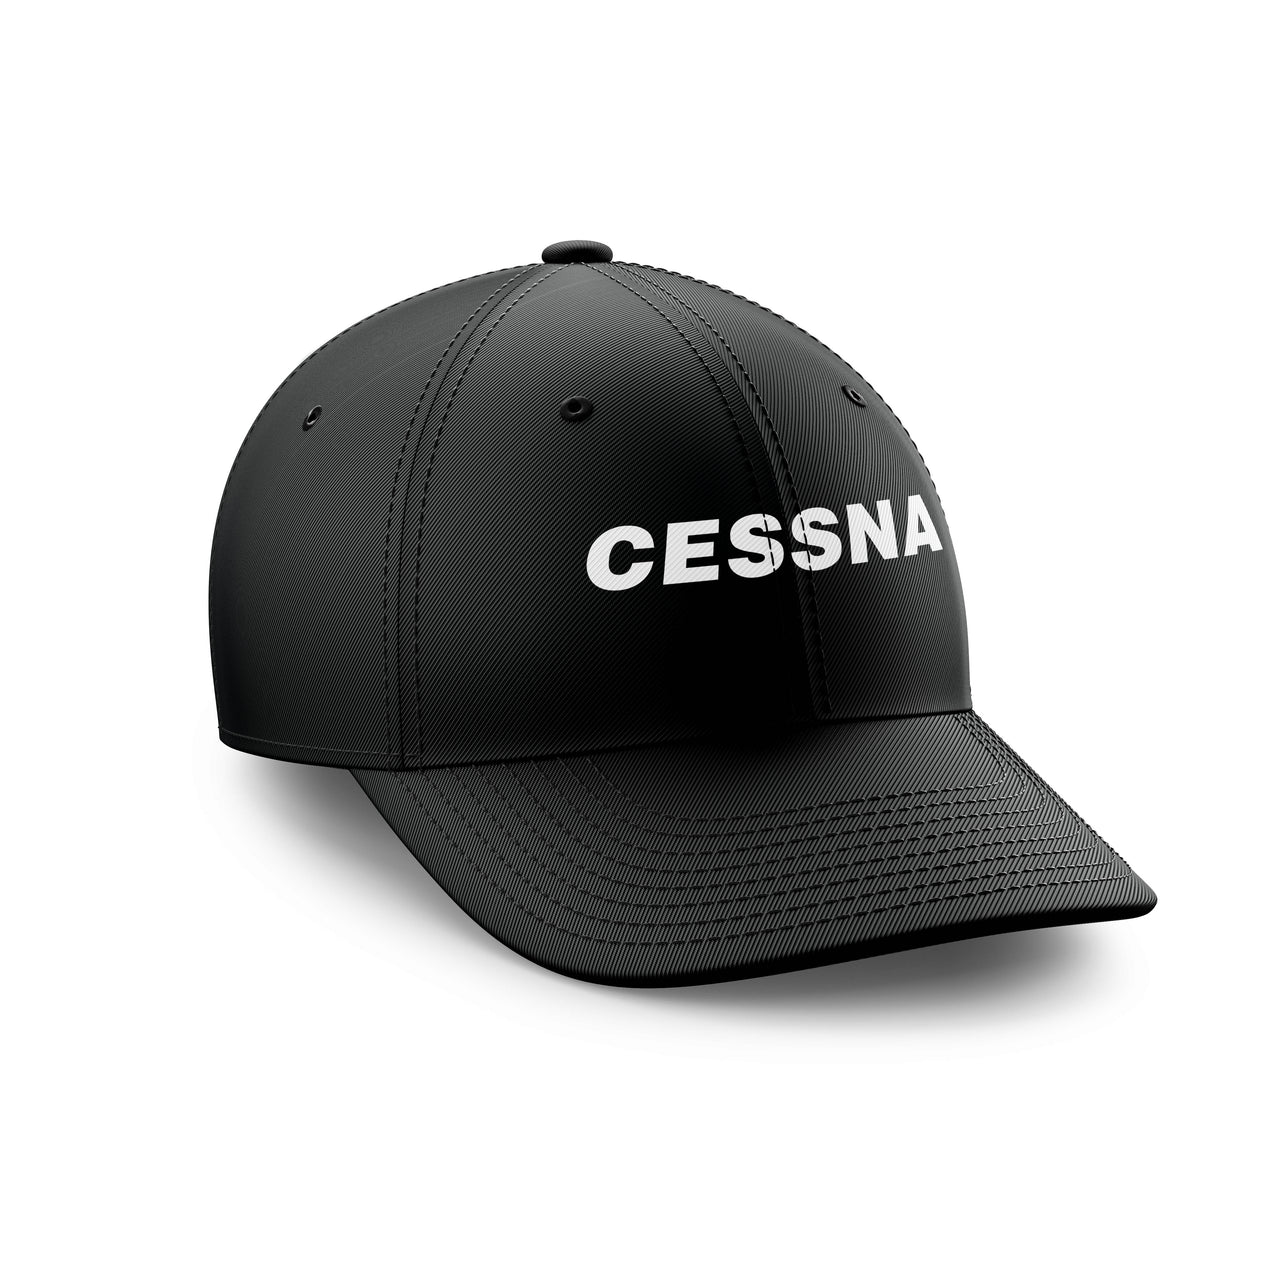 Cessna & Text Designed Embroidered Hats